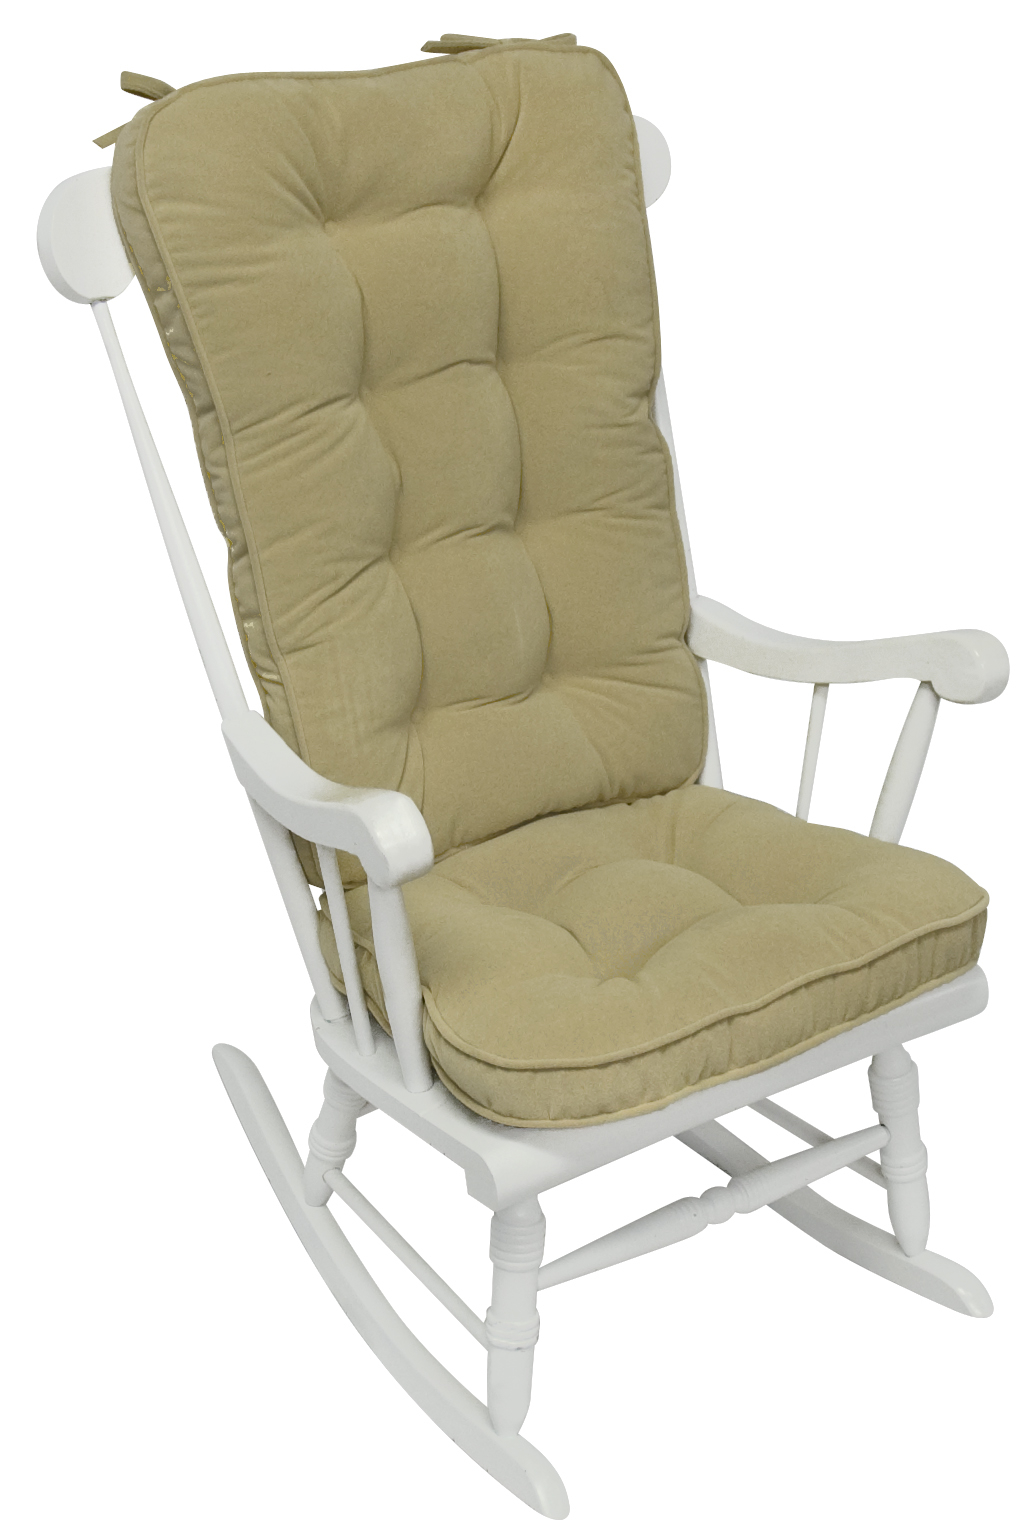 Glider Rocker Replacement Cushions, Cushions For Rocking Chairs Indoors Uk